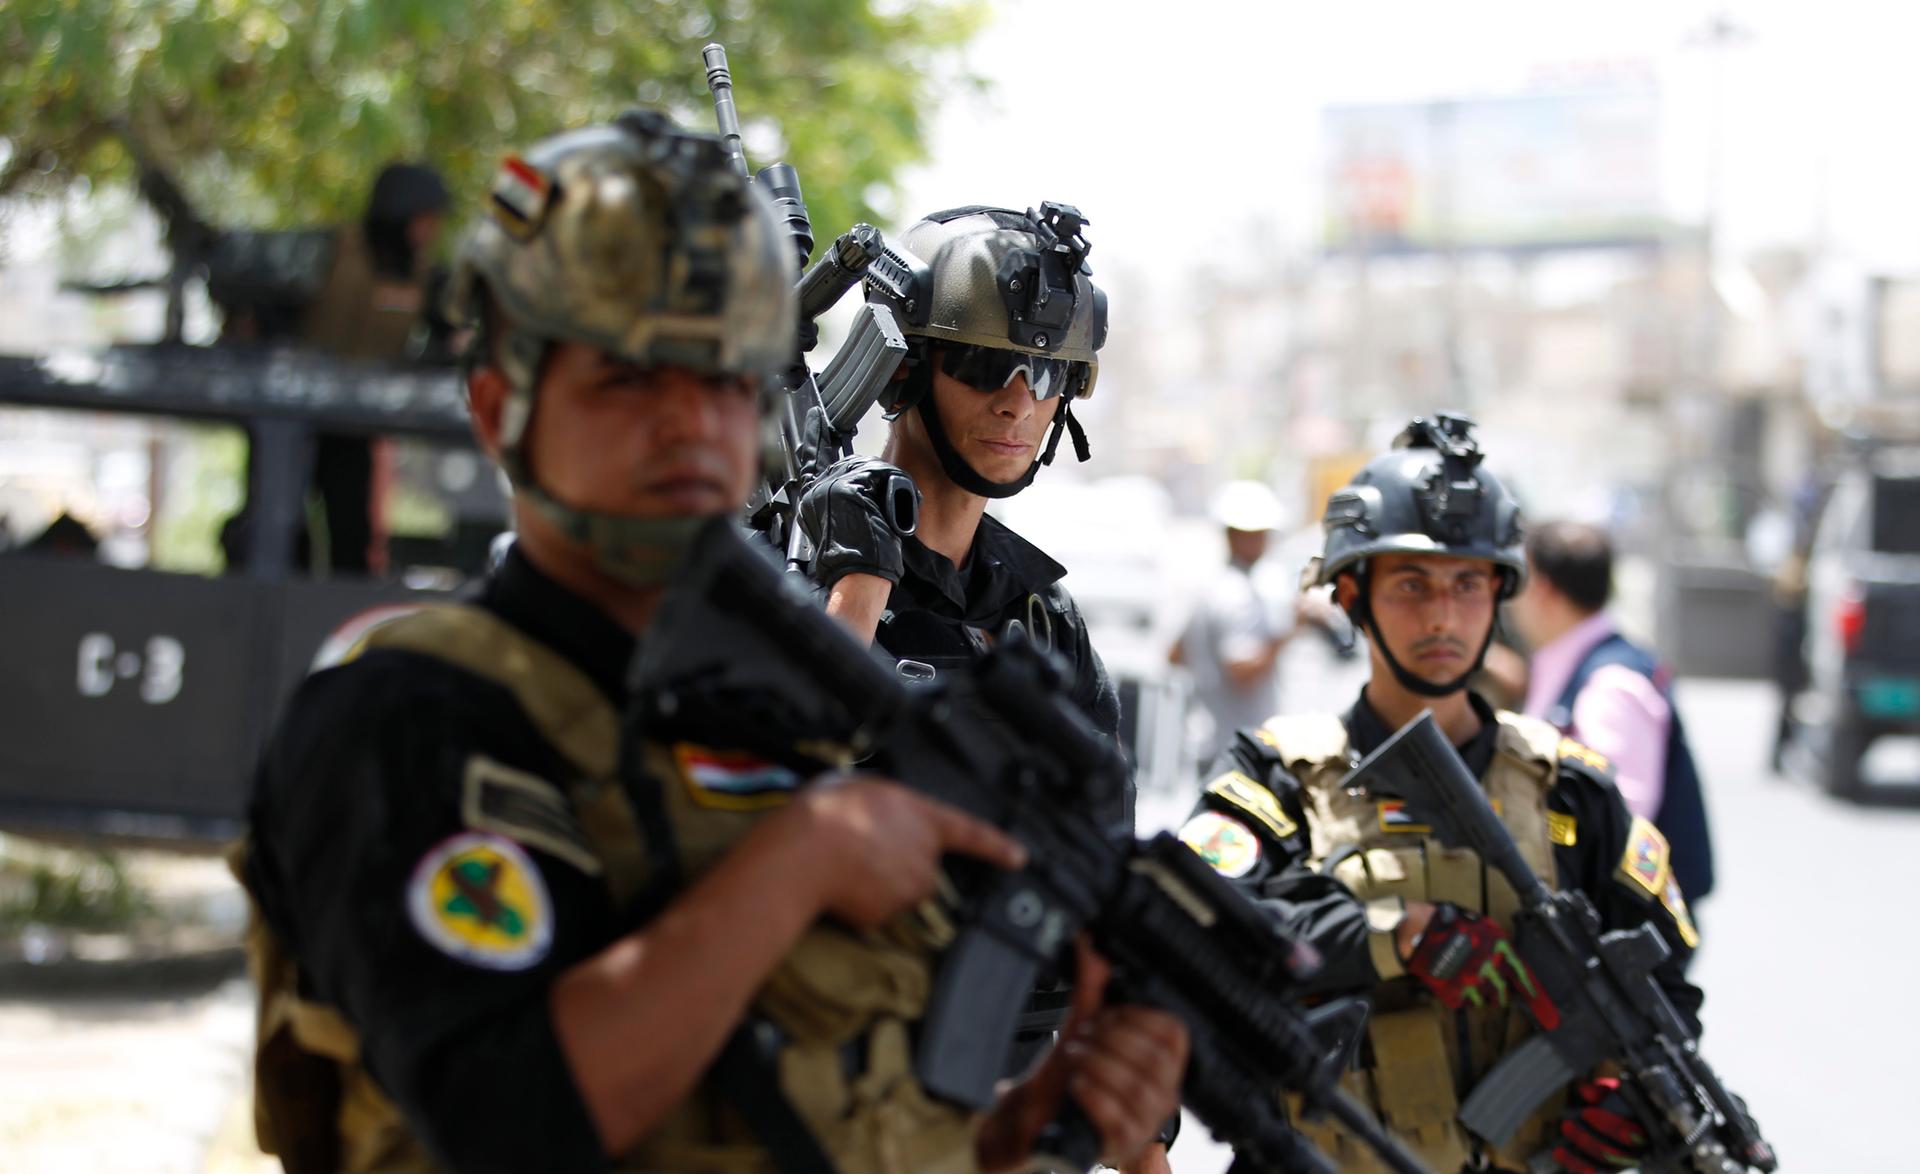 Members of the Iraqi Special Operations Forces take part in an intensive security deployment in Baghdad's Amiriya district, June 18, 2014. 